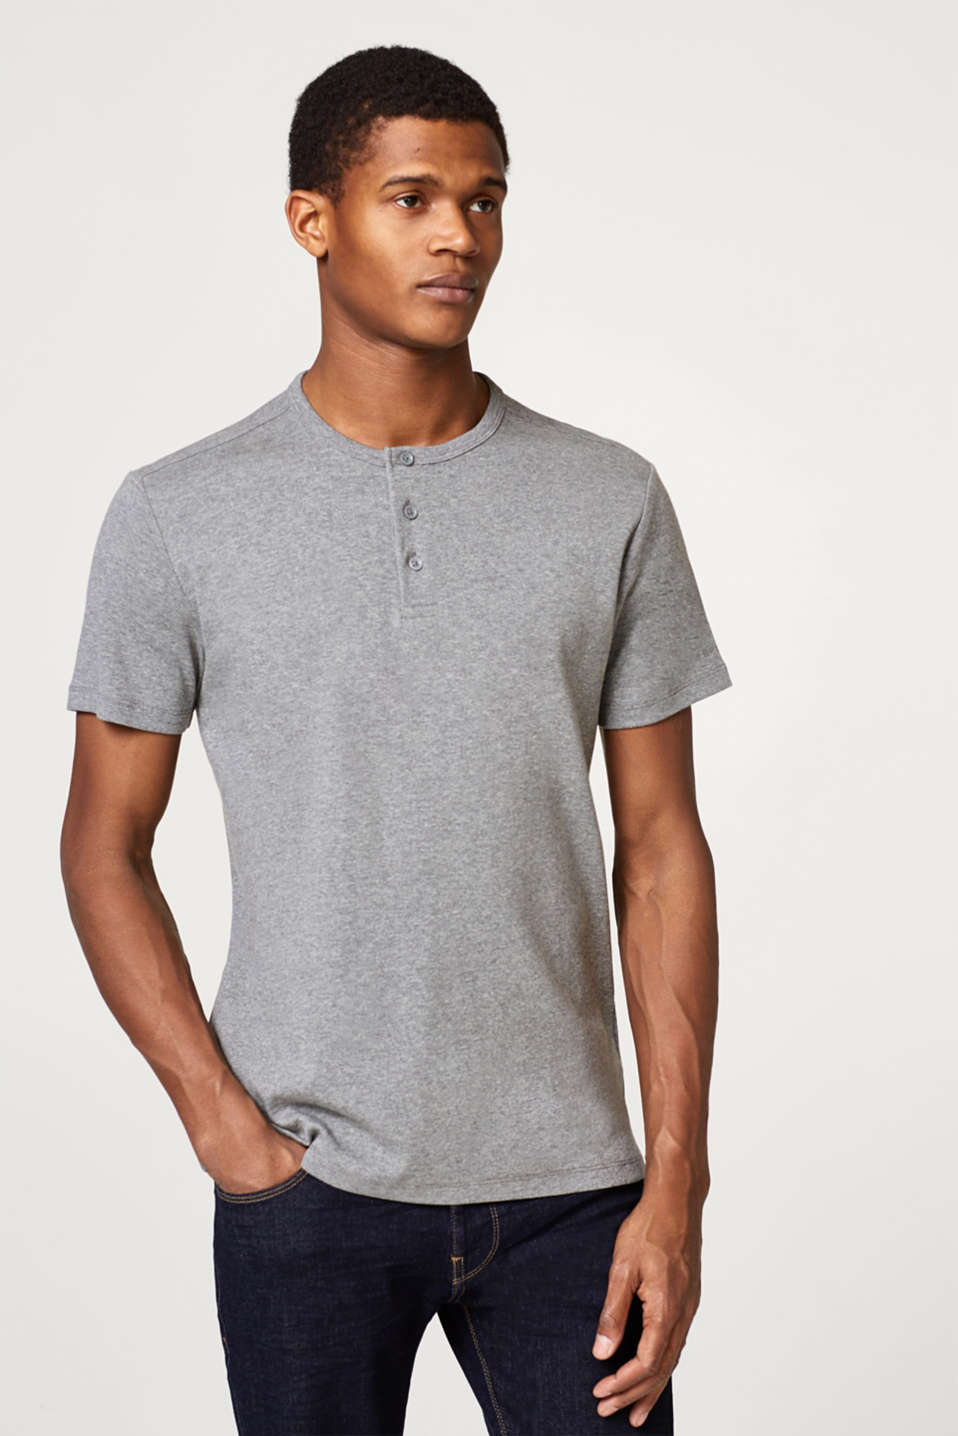 Esprit - Basic ribbed T-shirt with Henley neckline at our Online Shop